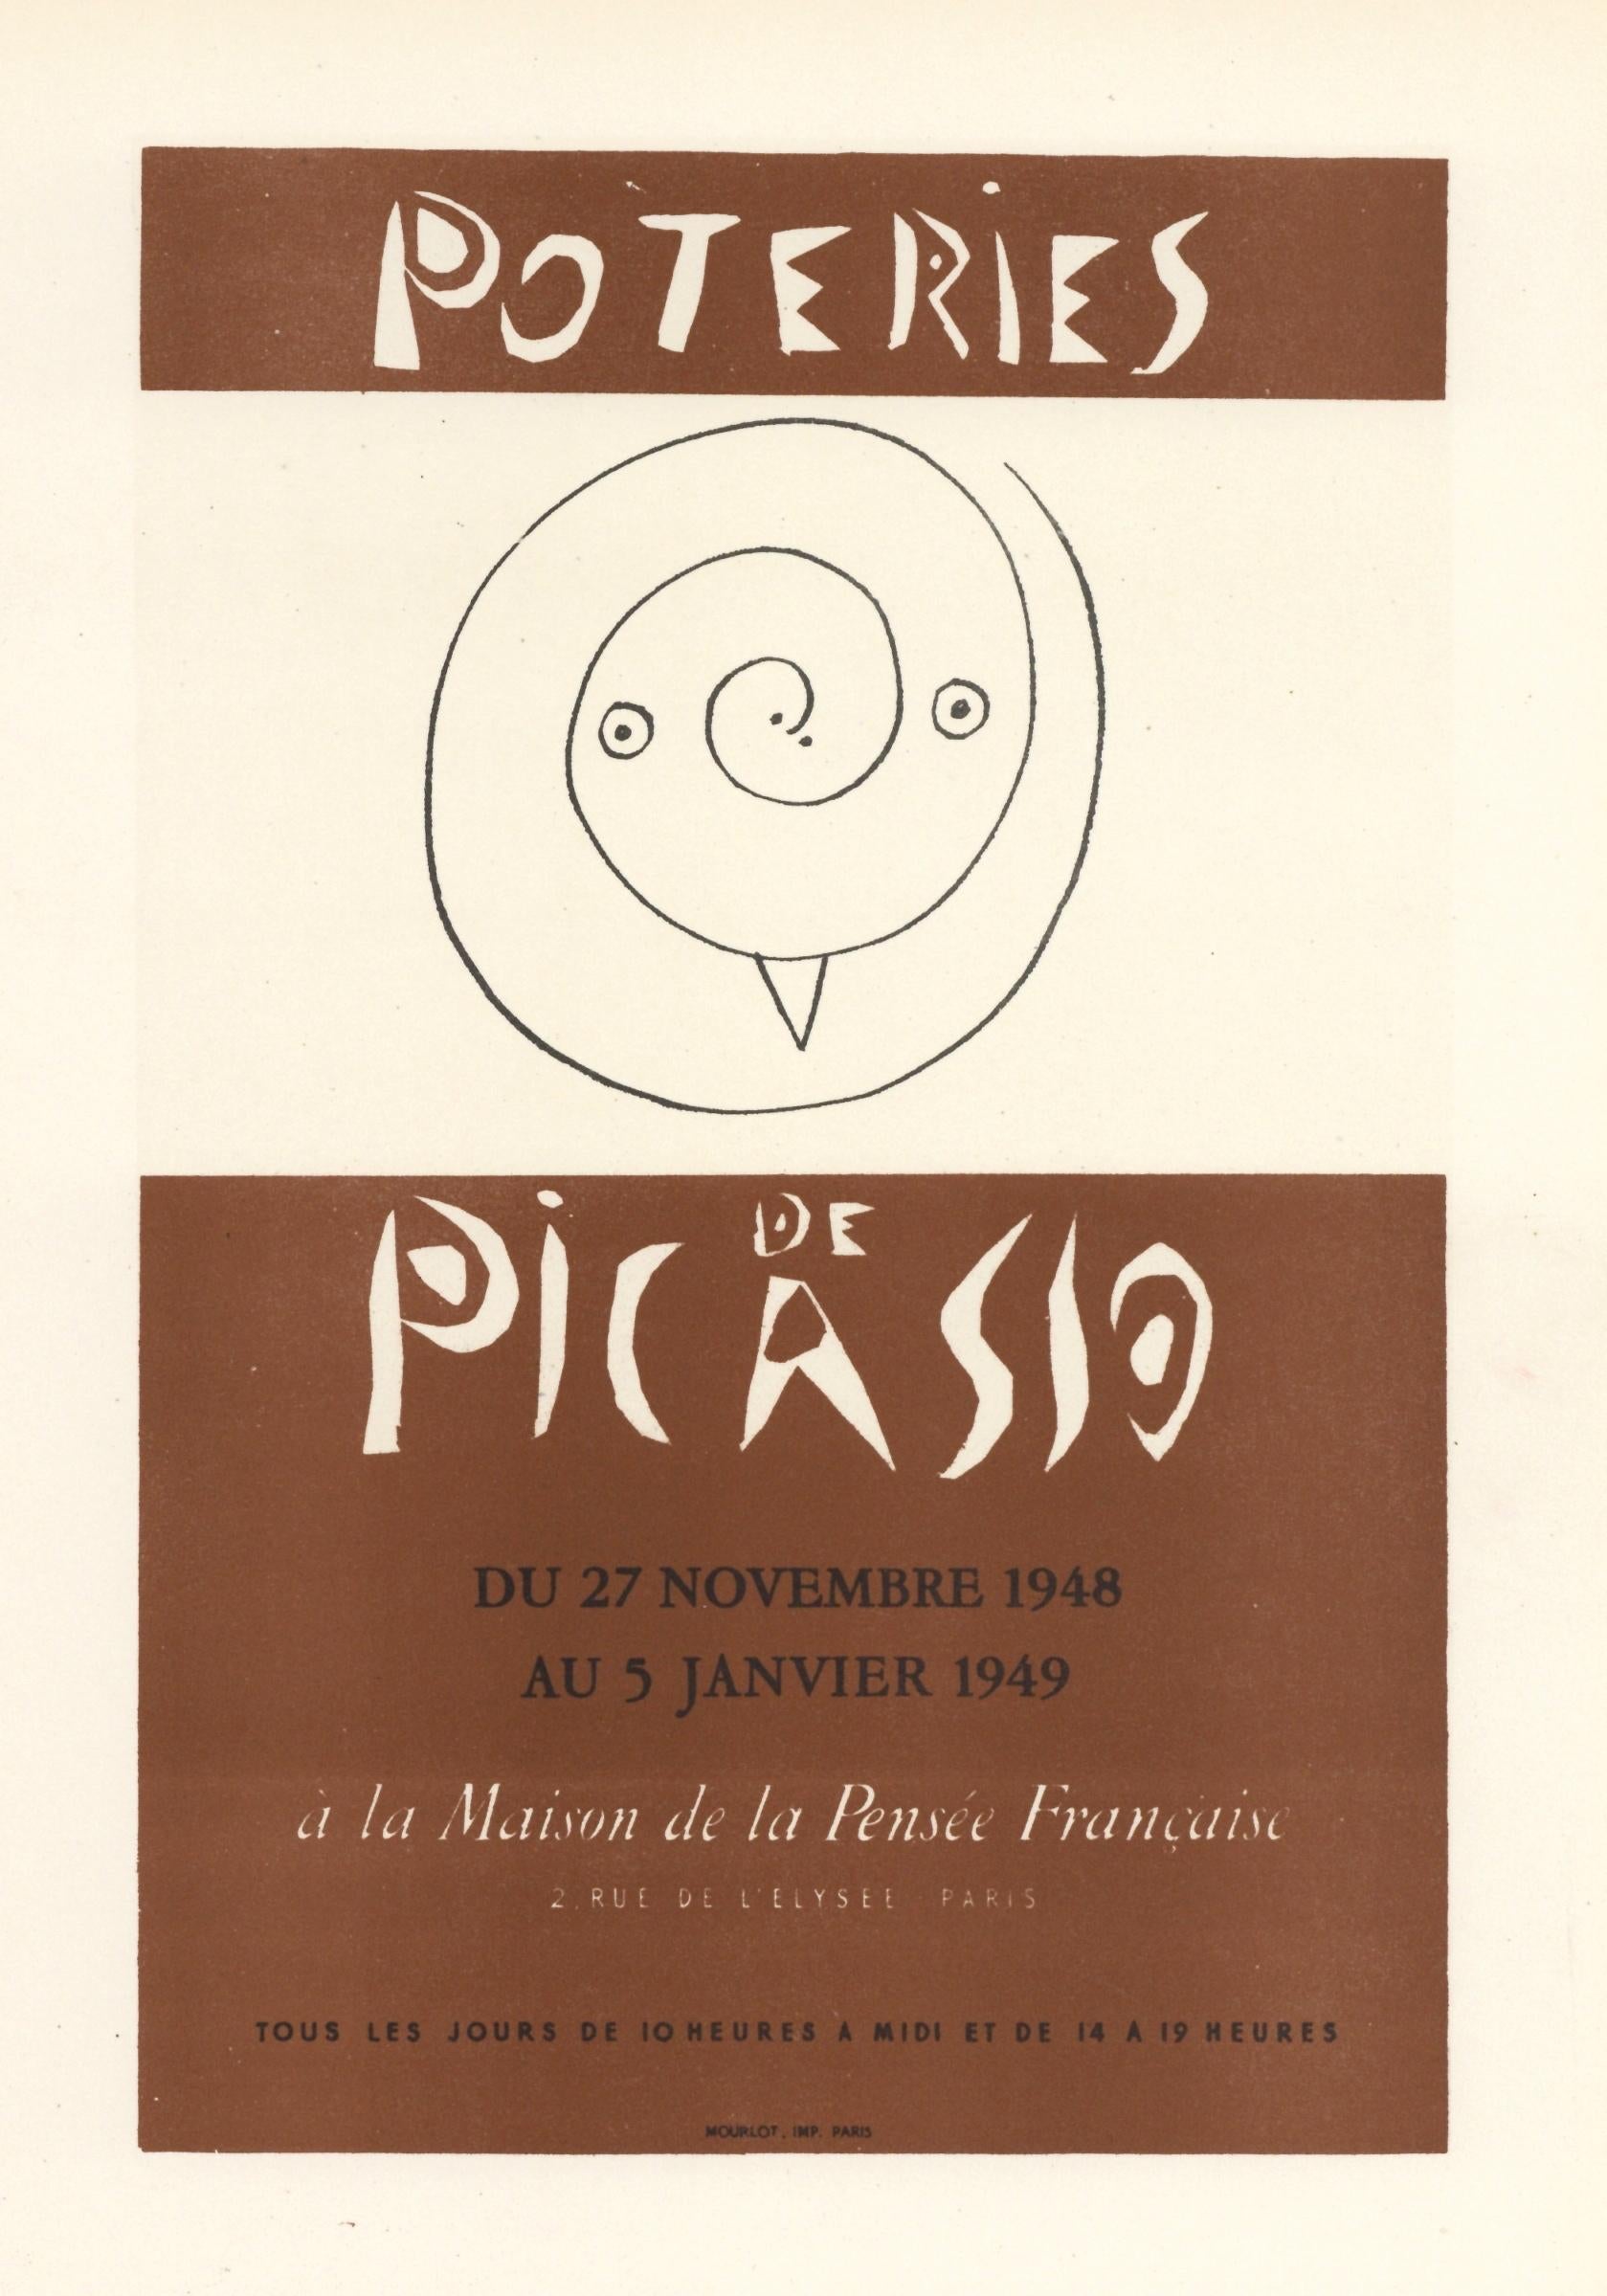 "Poteries de Picasso" lithograph poster - Print by (after) Pablo Picasso